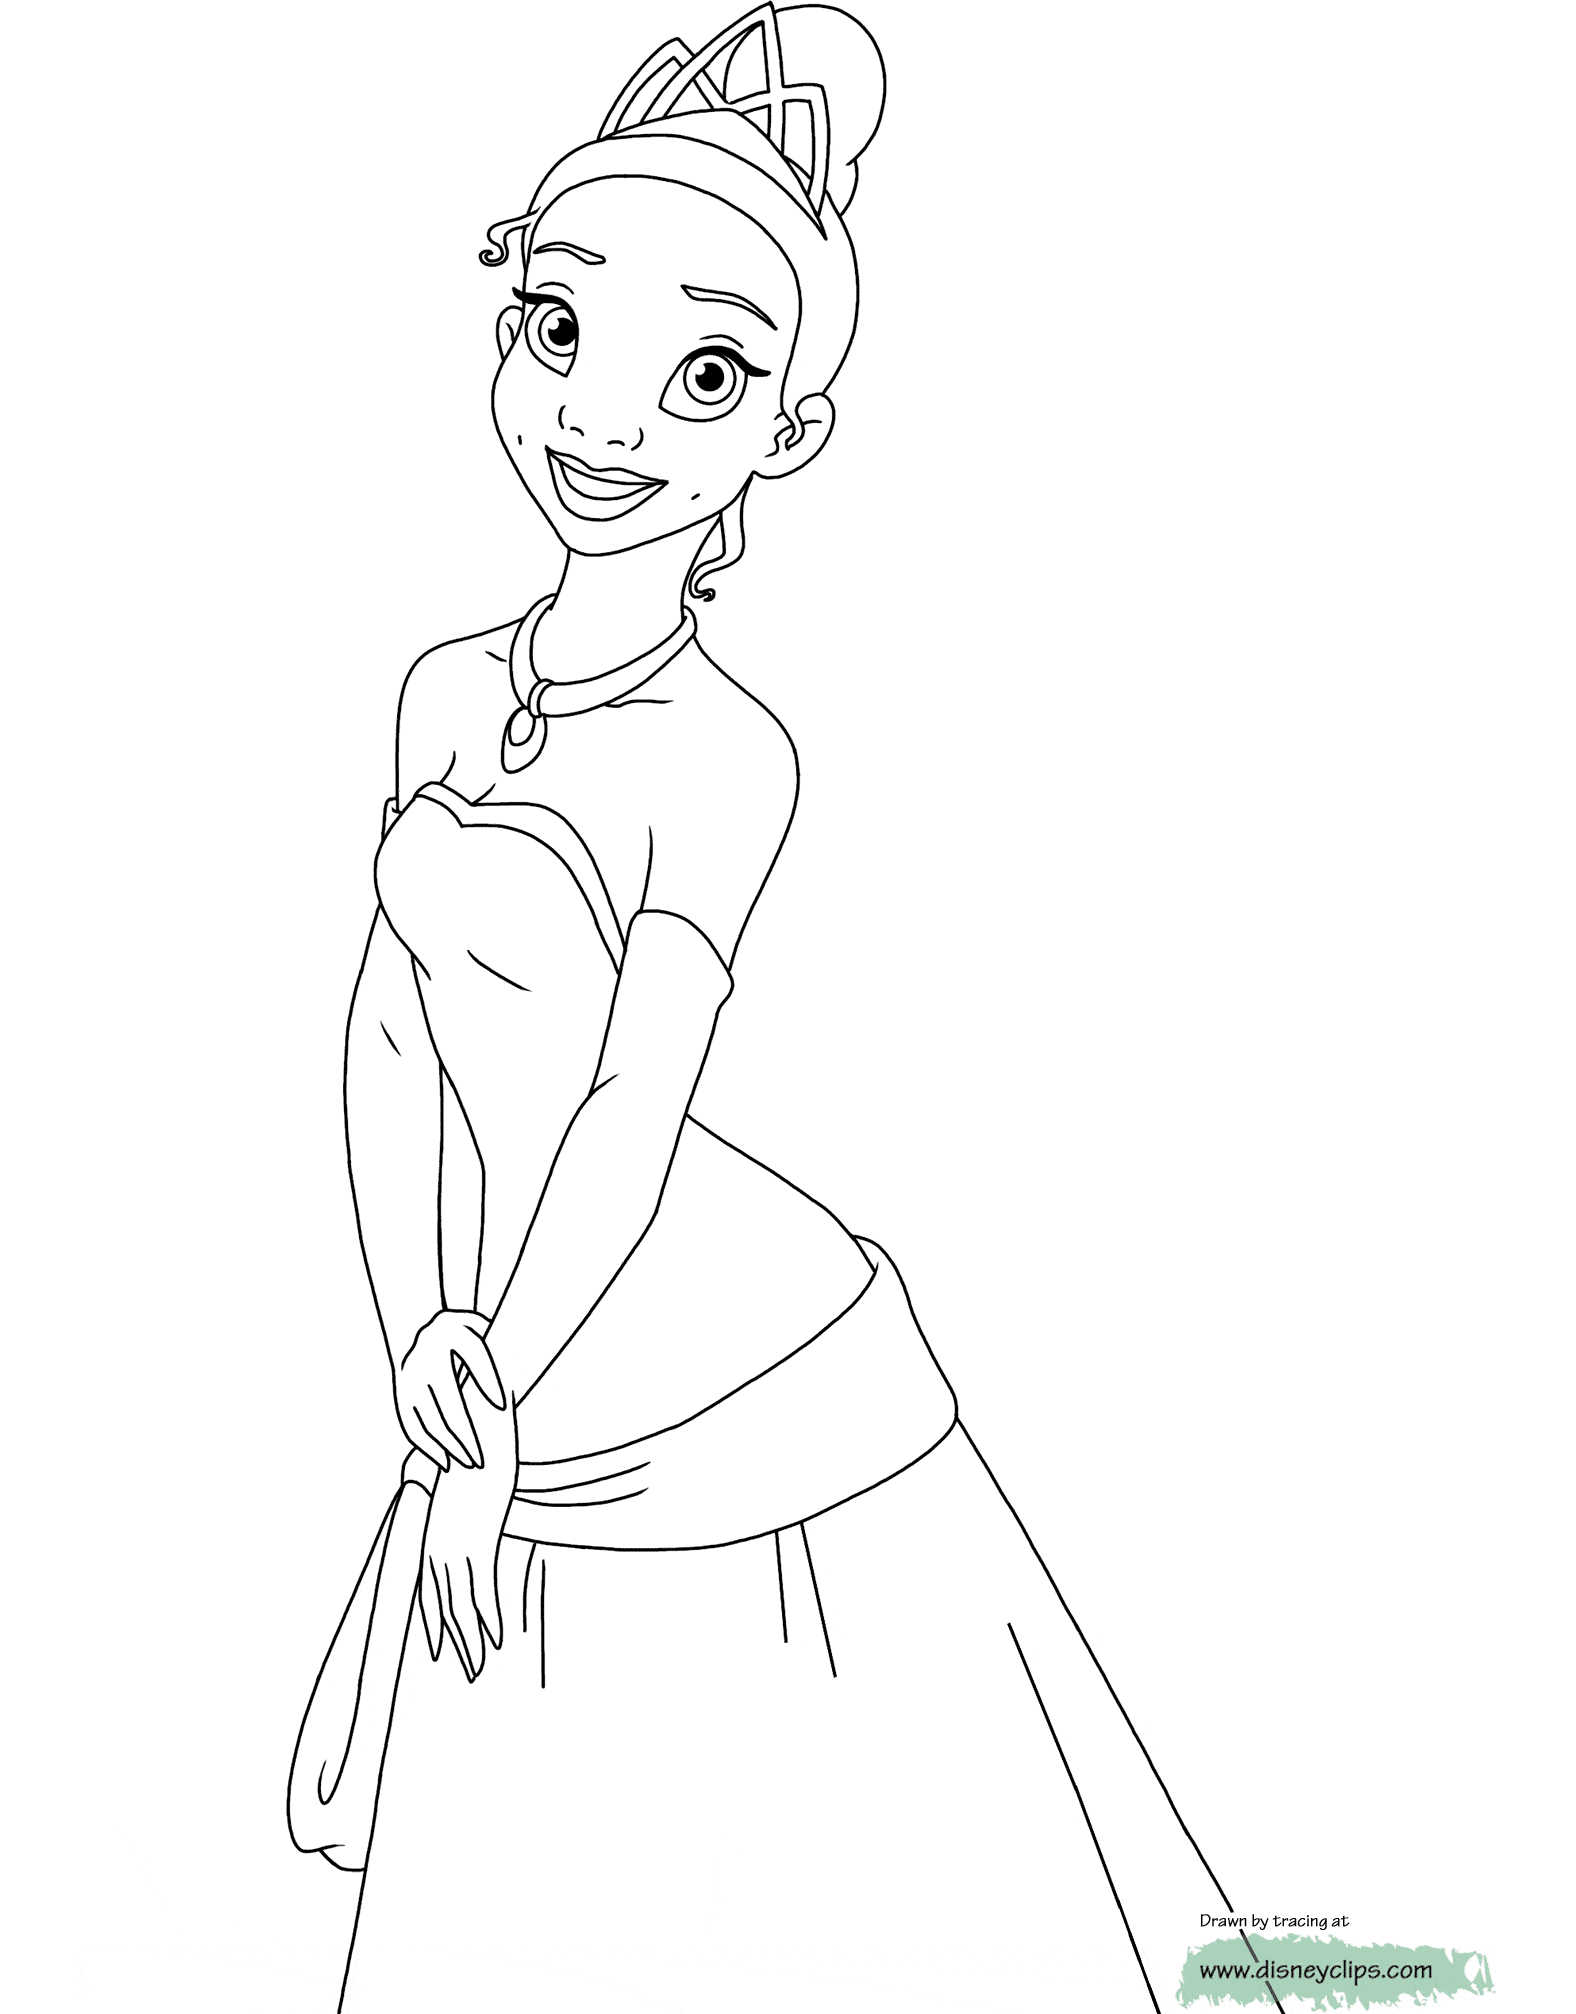 disney princess and frog coloring pages. The Princess and the Frog